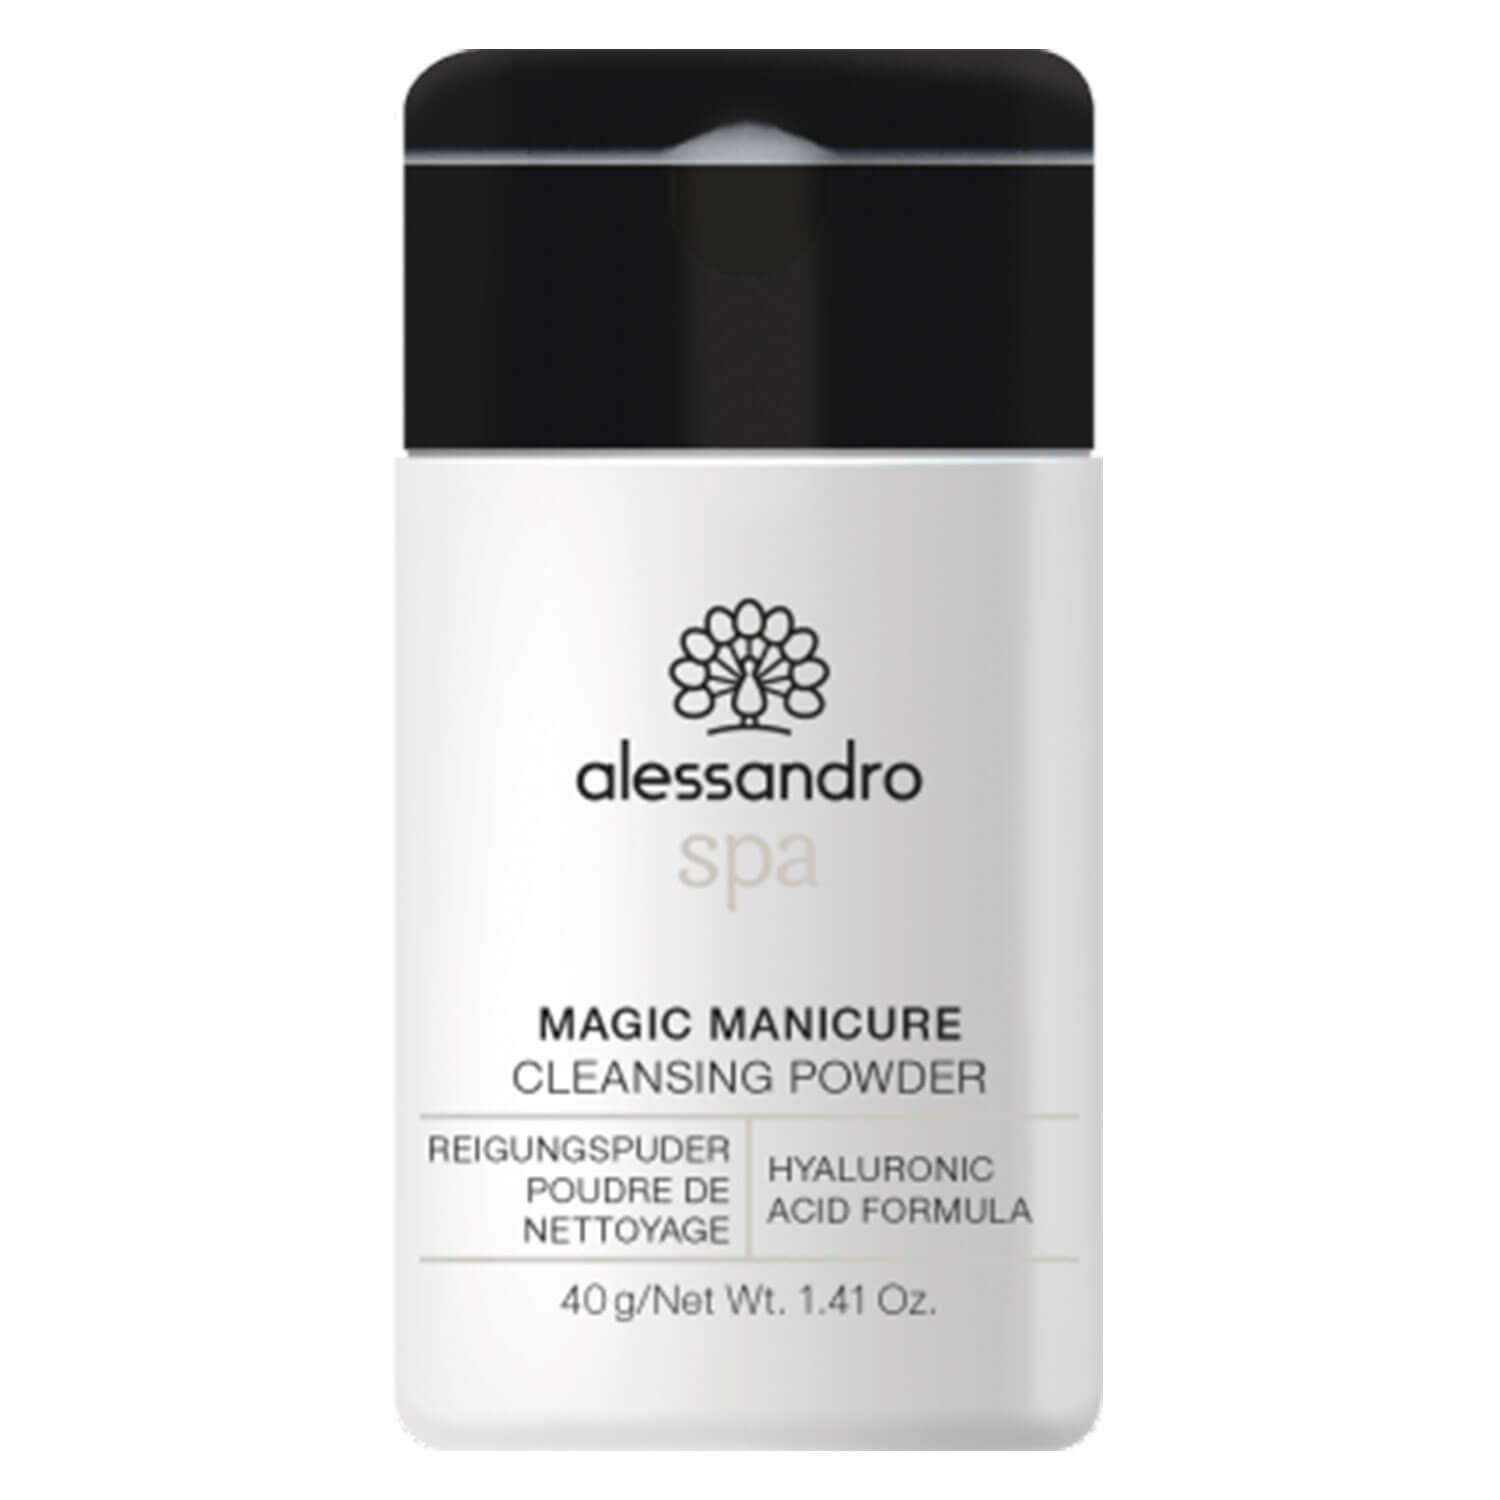 Alessandro Spa - Magic Manicure Cleansing Powder